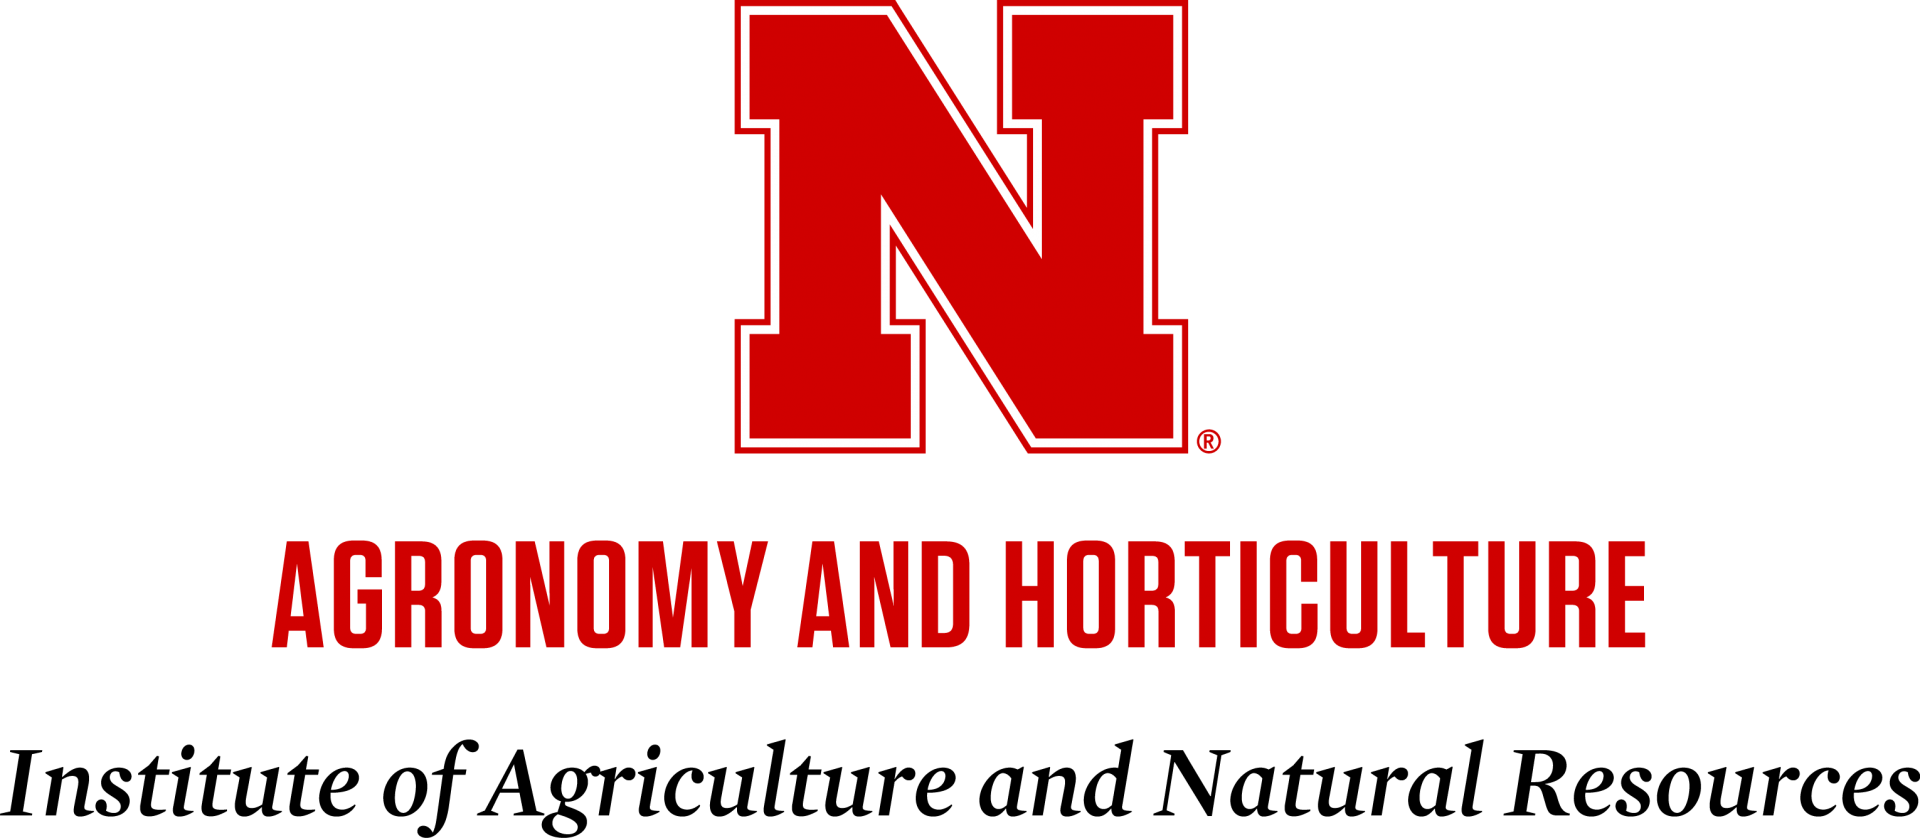 University of Nebraska–Lincoln Department of Agronomy and Horticulture